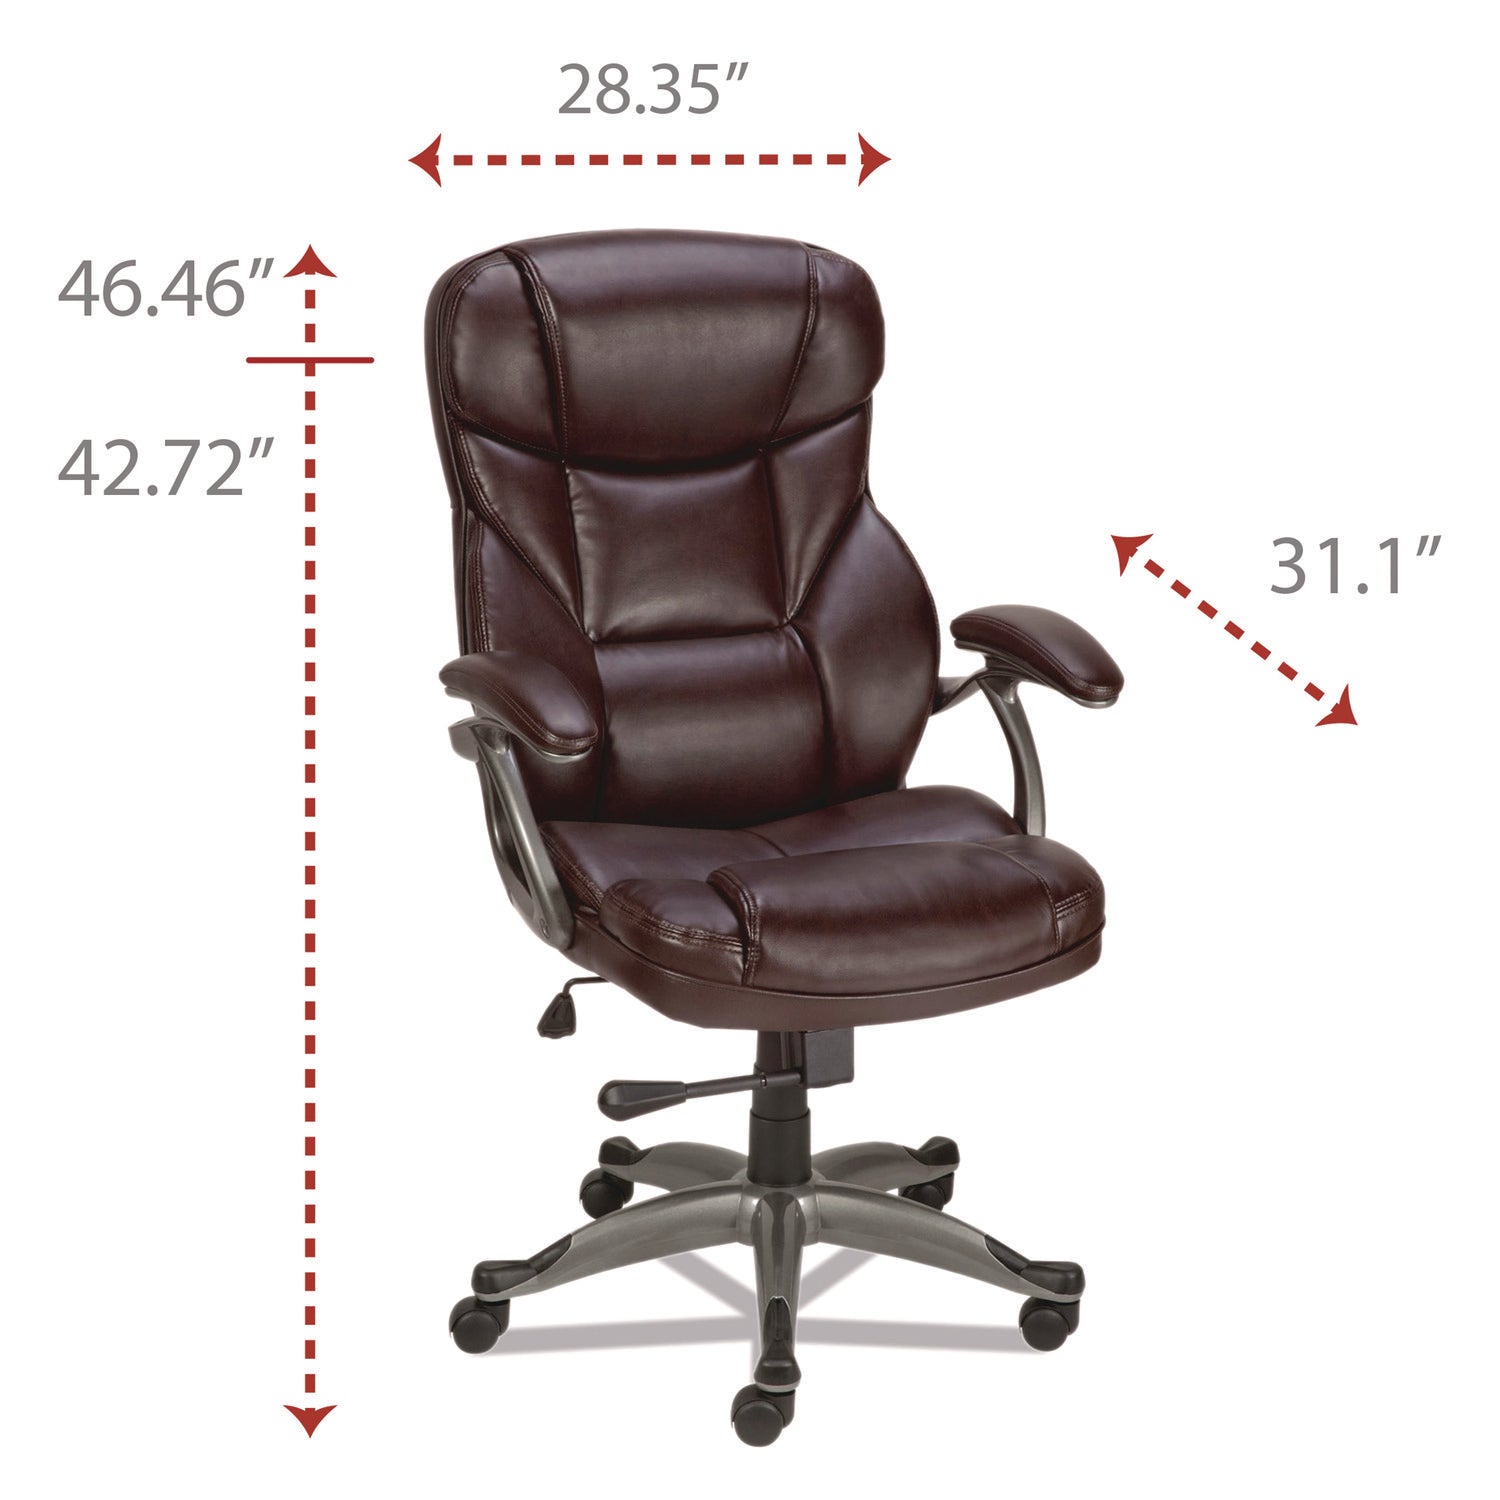 Alera Birns Series High-Back Task Chair, Supports Up to 250 lb, 18.11" to 22.05" Seat Height, Brown Seat/Back, Chrome Base - 7